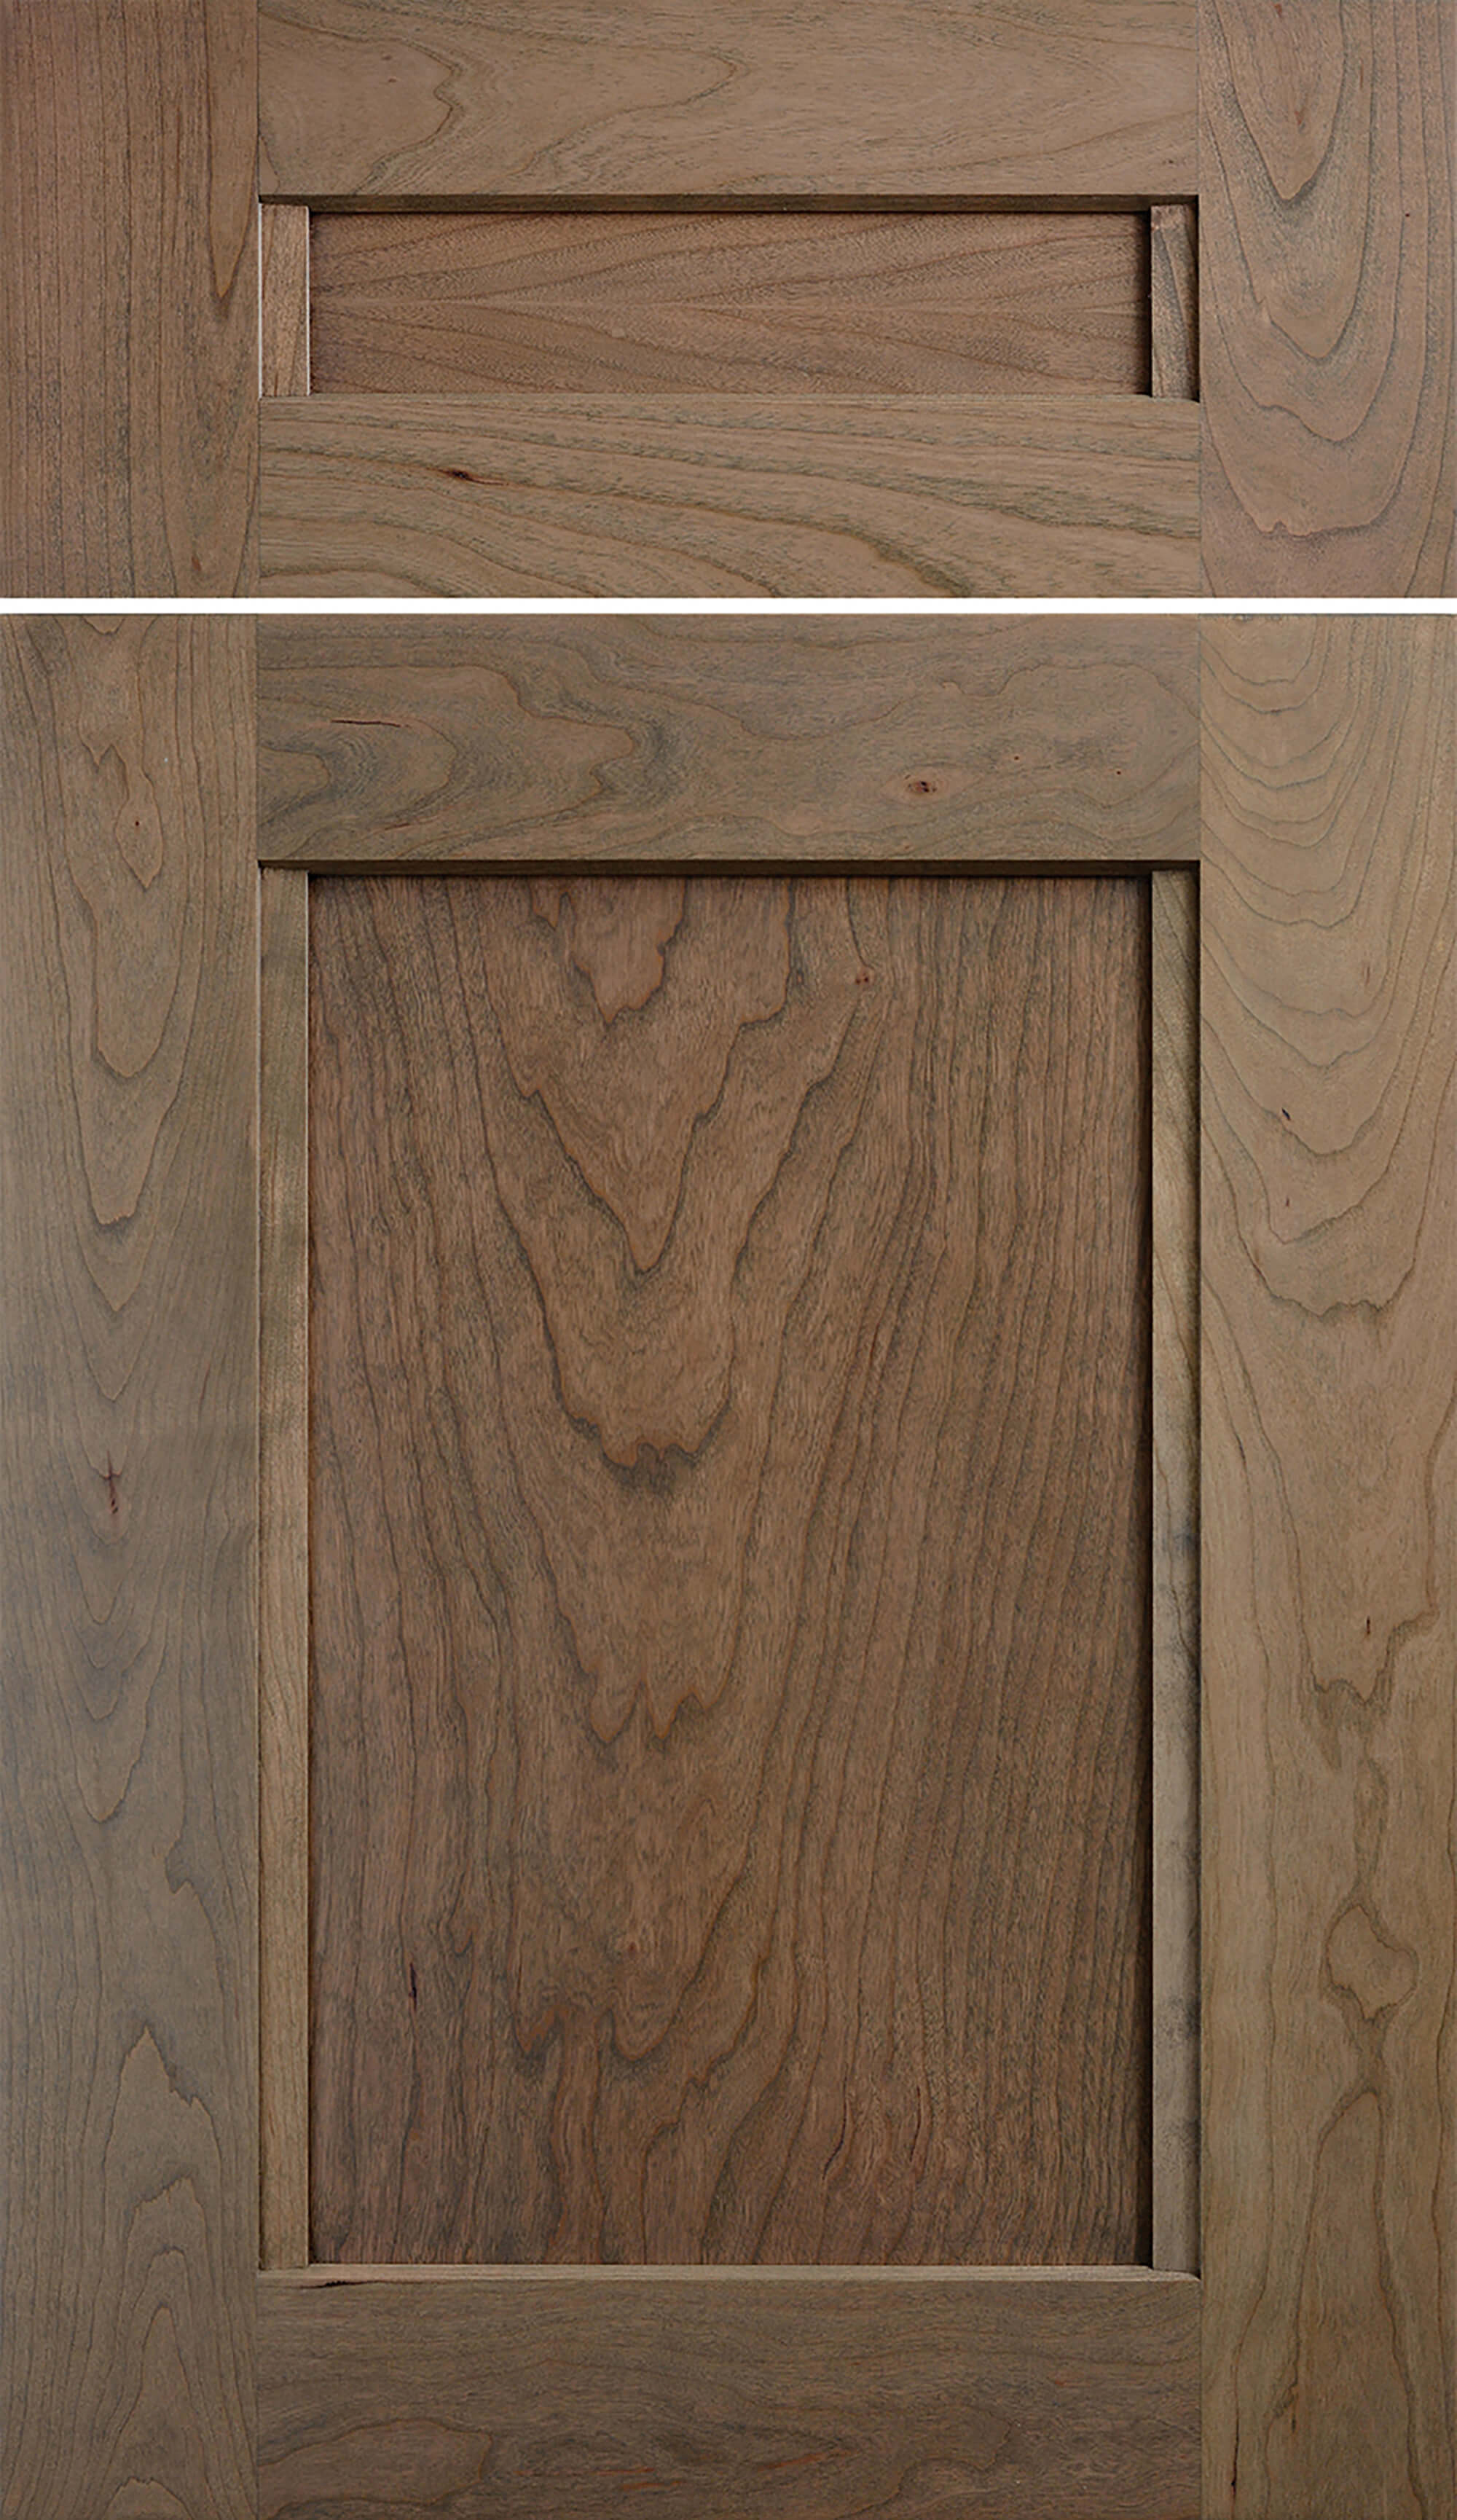 A flat panel door style called Avery from Dura Supreme Cabinetry shown in Cherry wood with a light gray-brown stained finish color. Cherry wood cabinets from Dura Supreme are American-made semi-custom to custom cabinets.